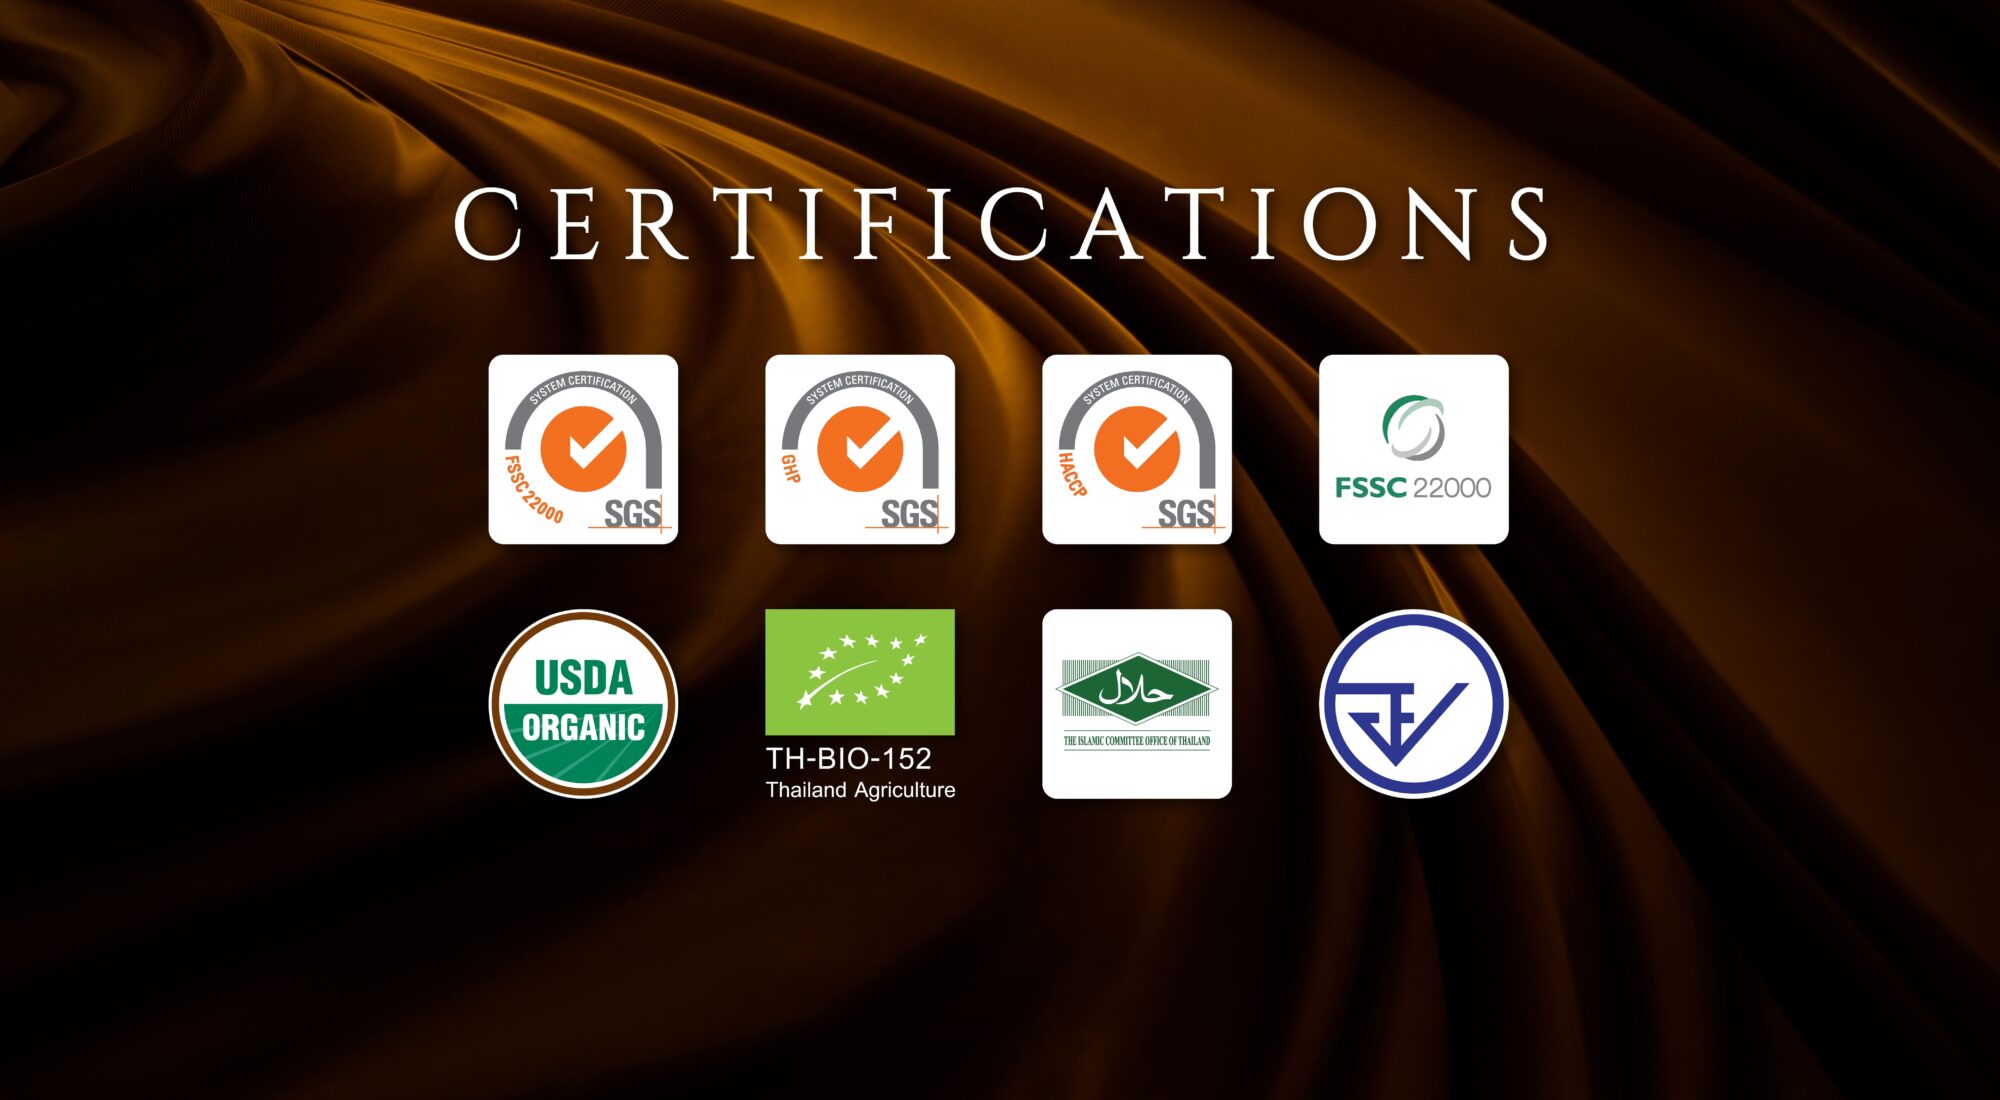 MarkRin's certifications